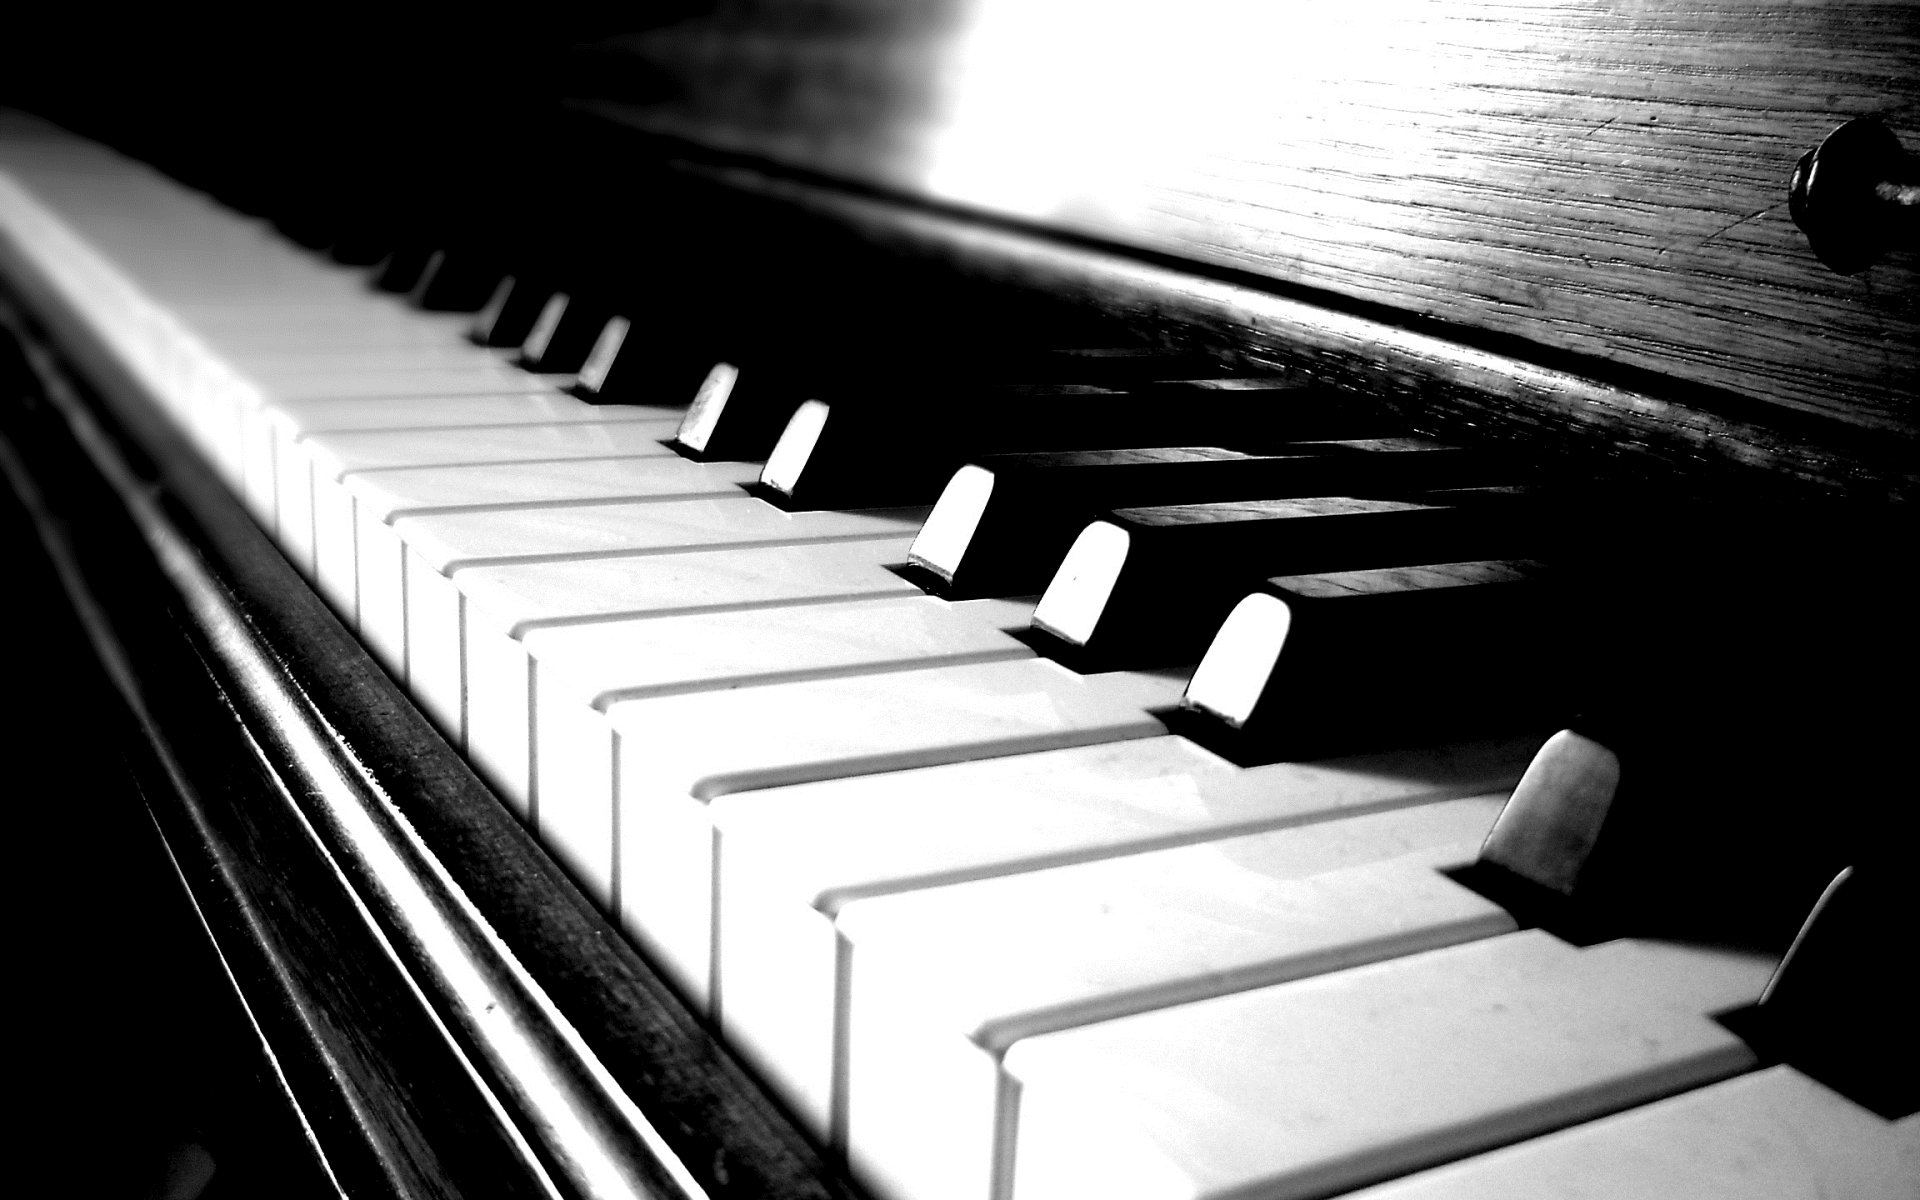 Piano Wallpapers Desktop White Black 333575 Pictures to